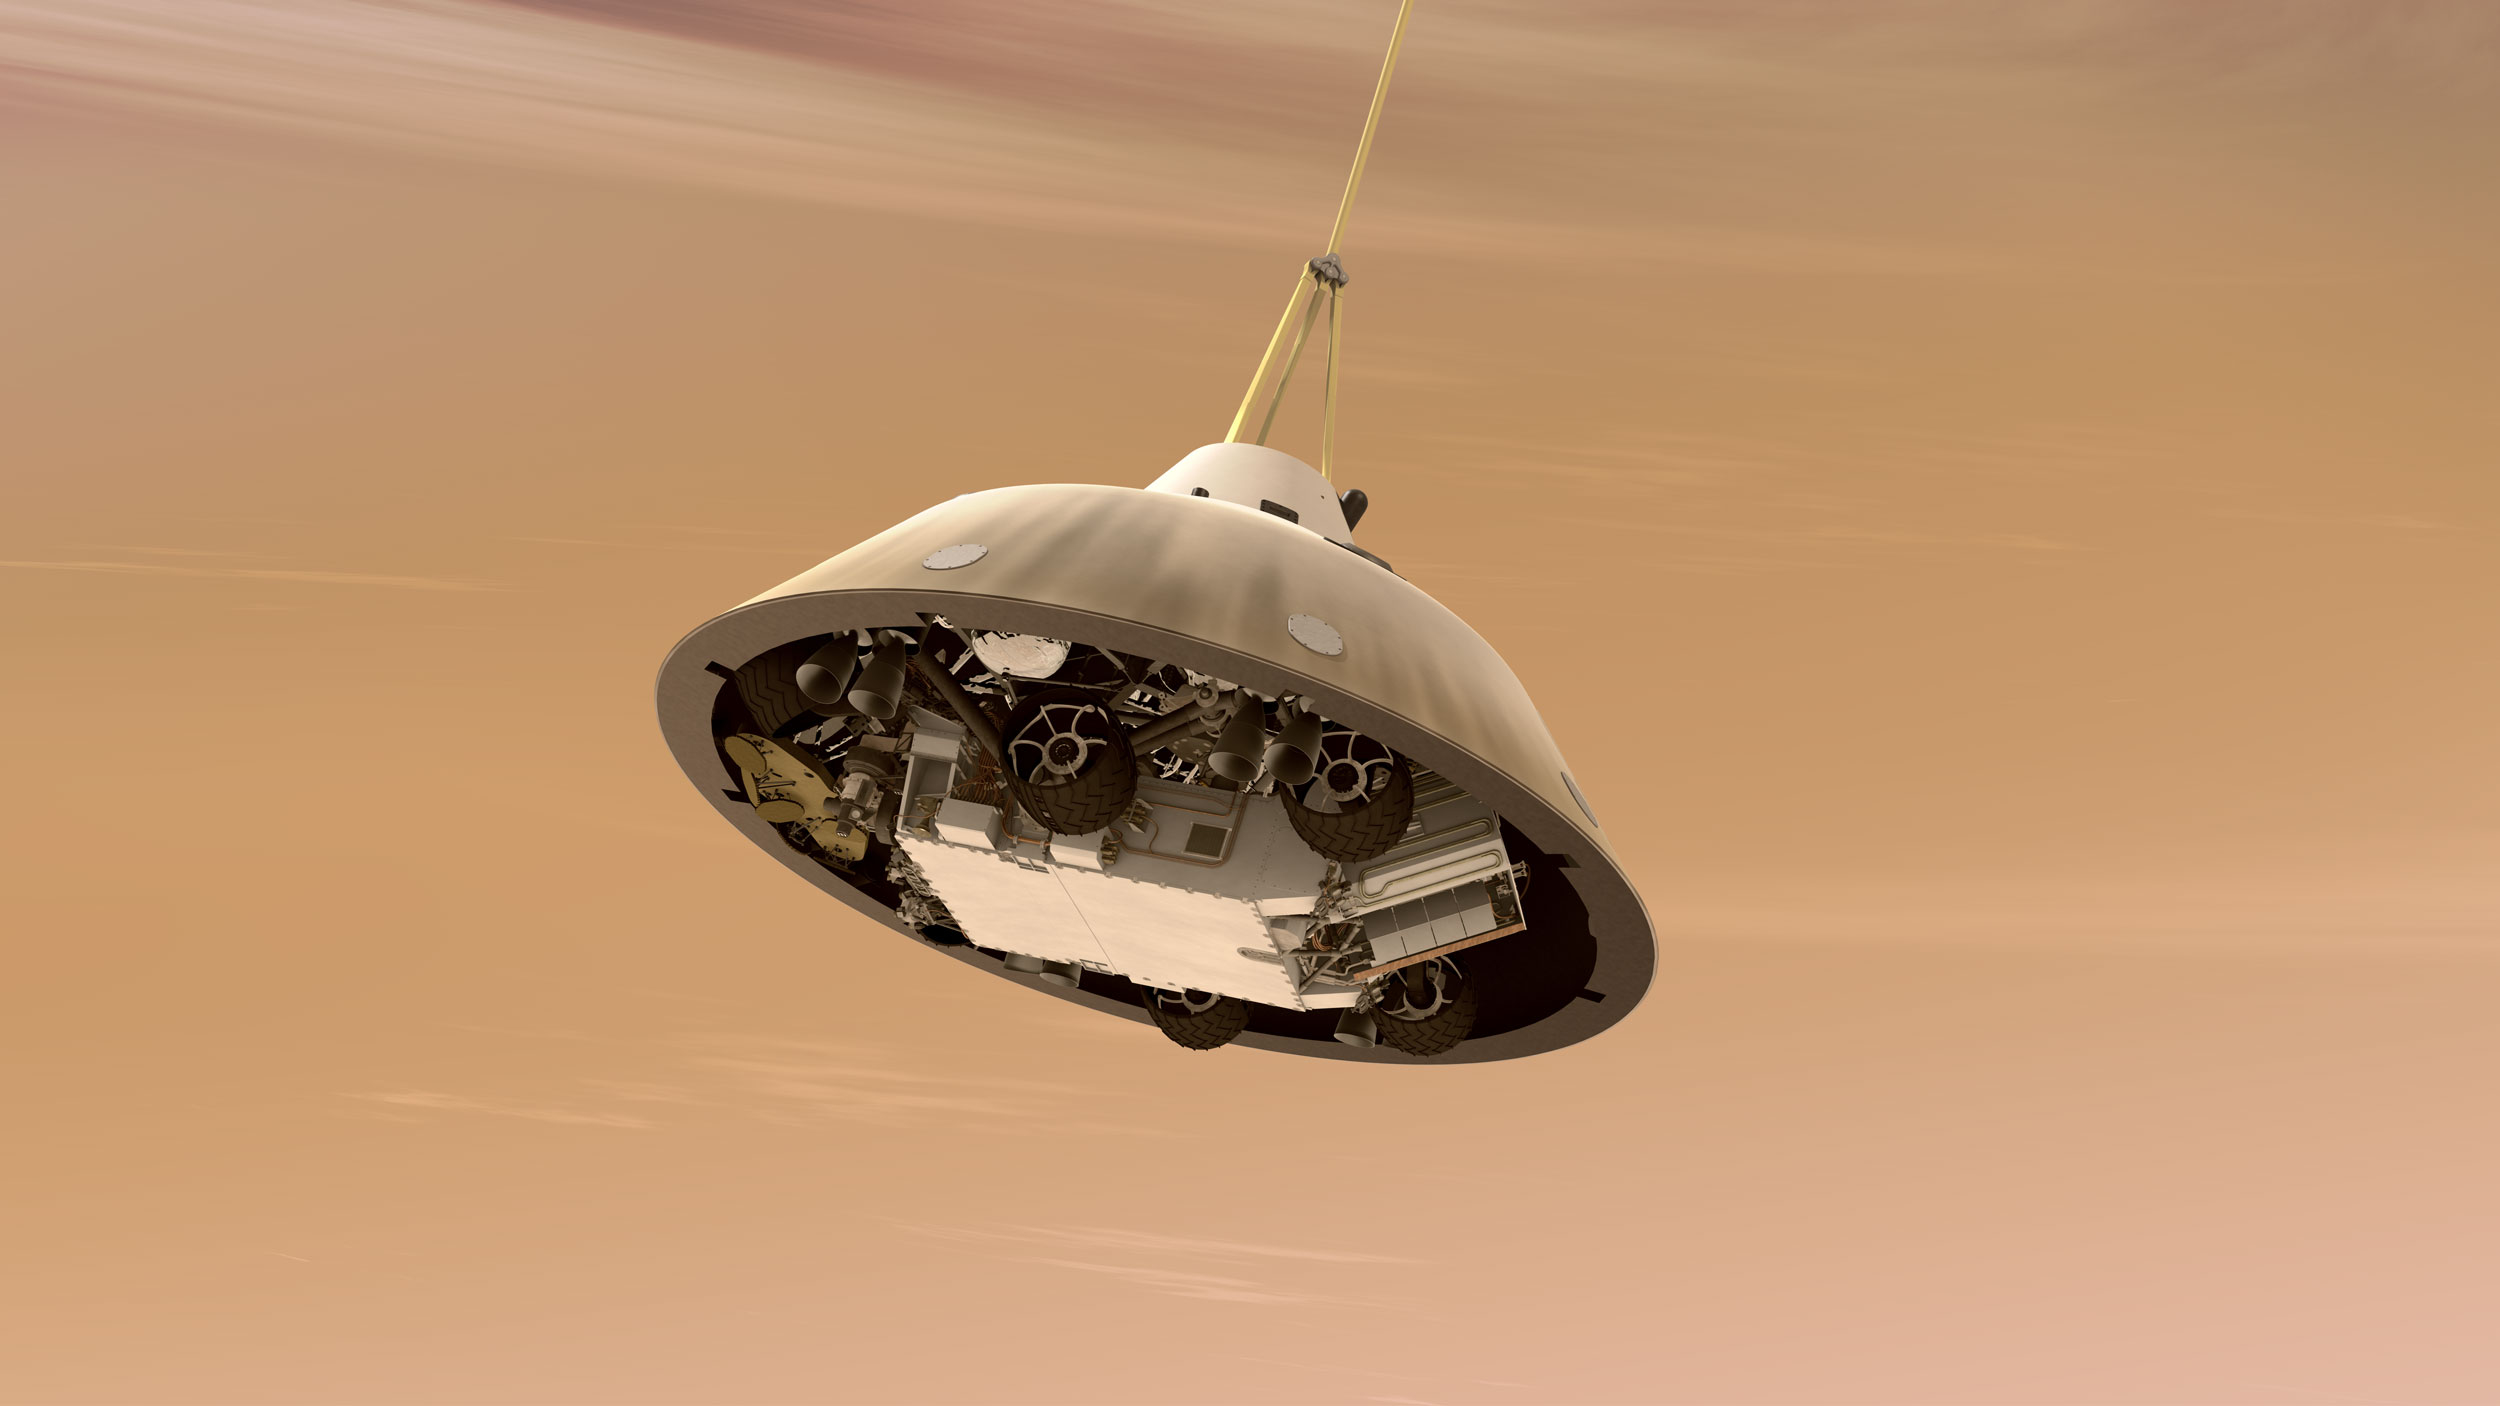 This is an artist's concept of NASA's Curiosity rover tucked inside the Mars Science Laboratory spacecraft's backshell while the spacecraft is descending on a parachute toward Mars.